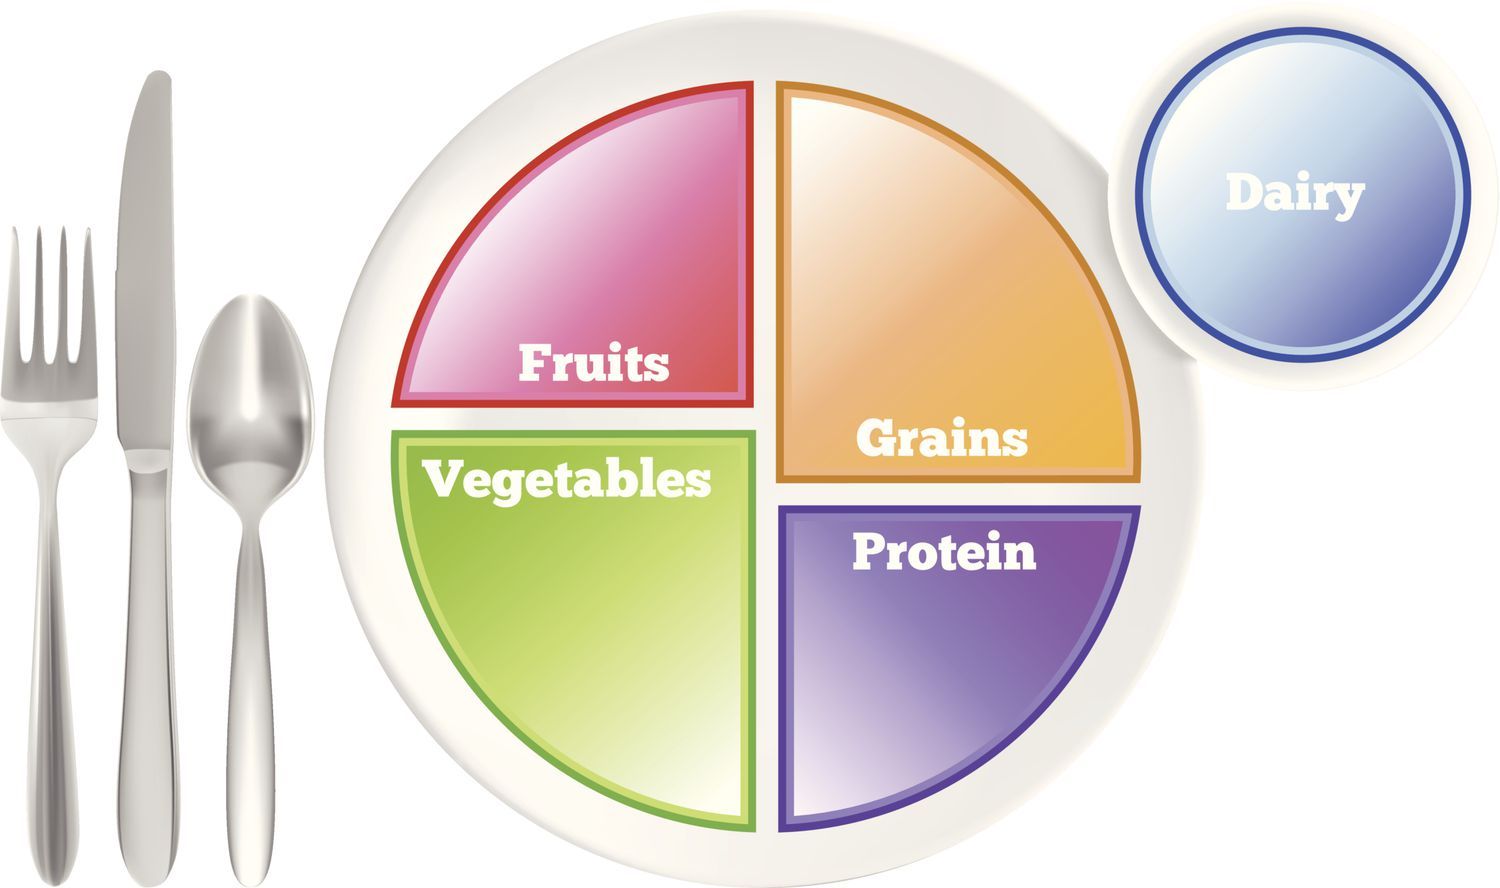 MyPlate Discontinued? What is MyPlate? Find healthy eating recommendations and habits.